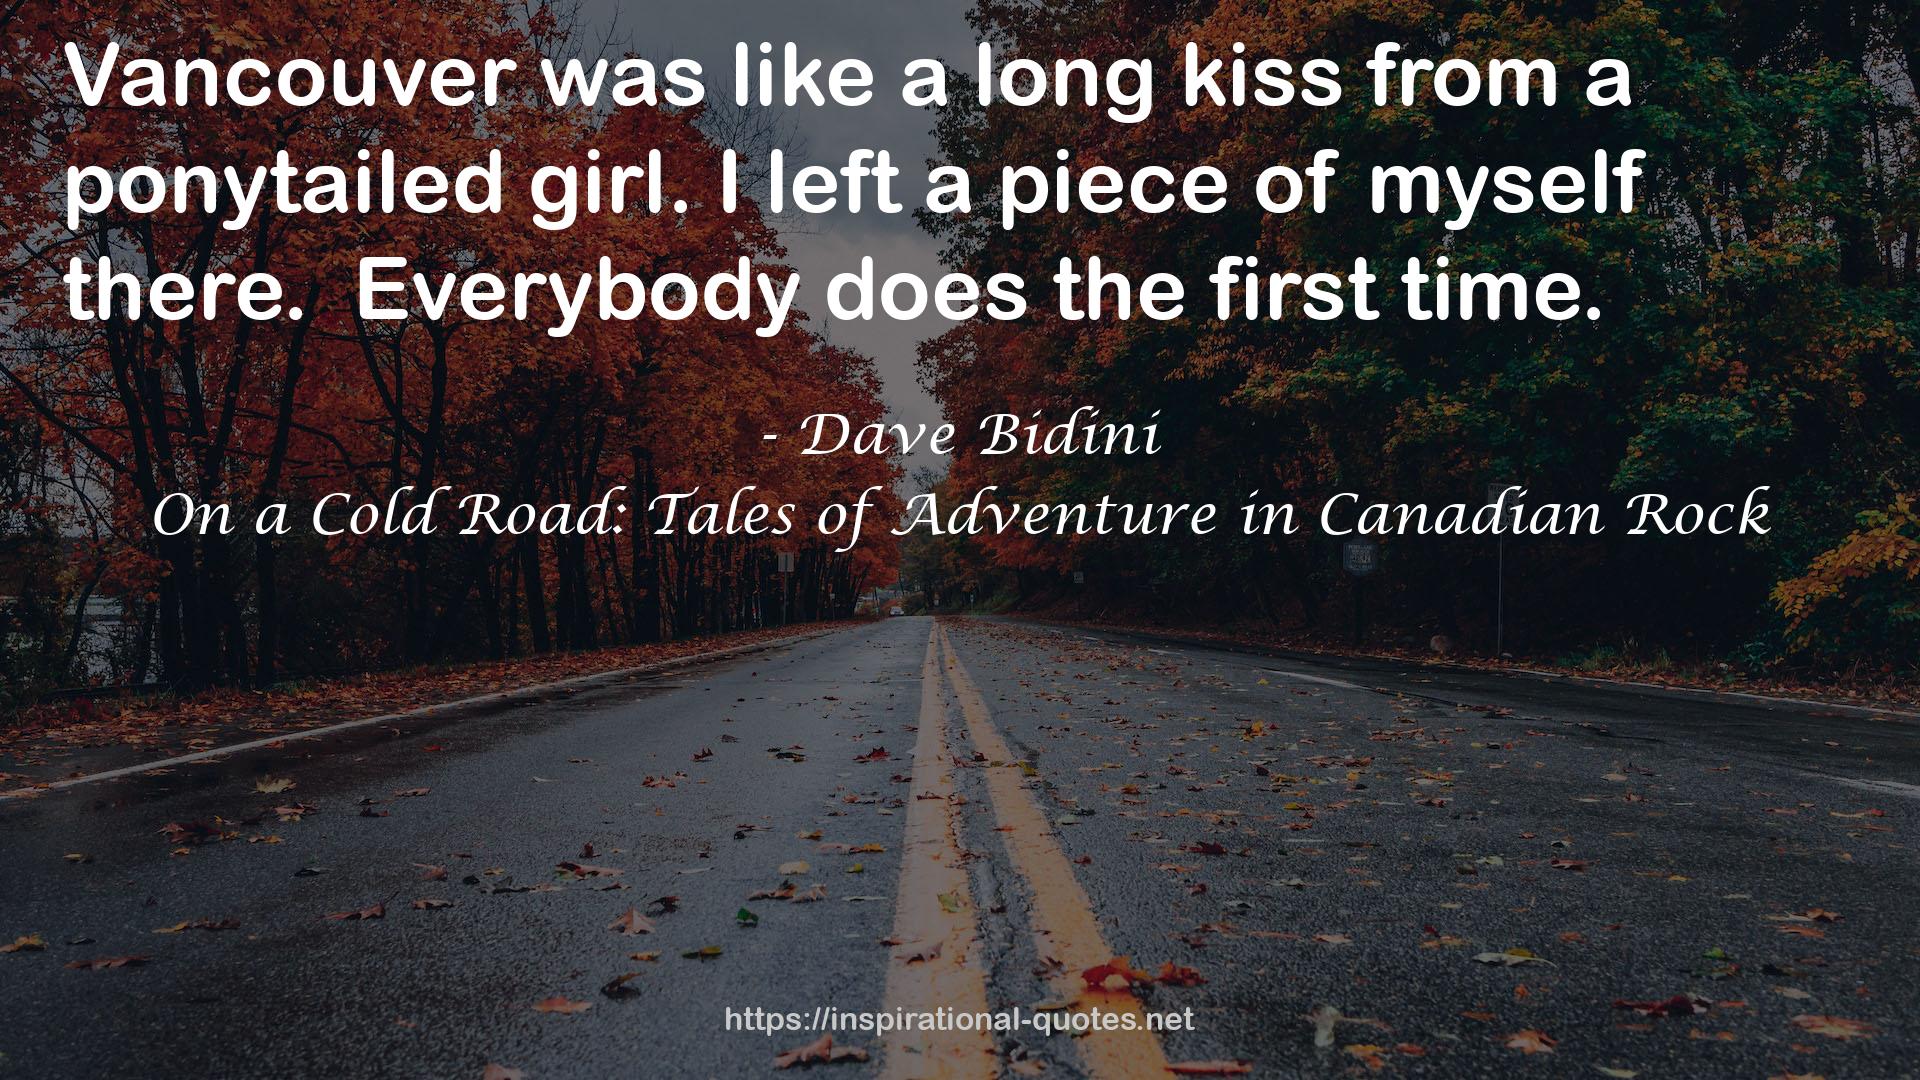 On a Cold Road: Tales of Adventure in Canadian Rock QUOTES